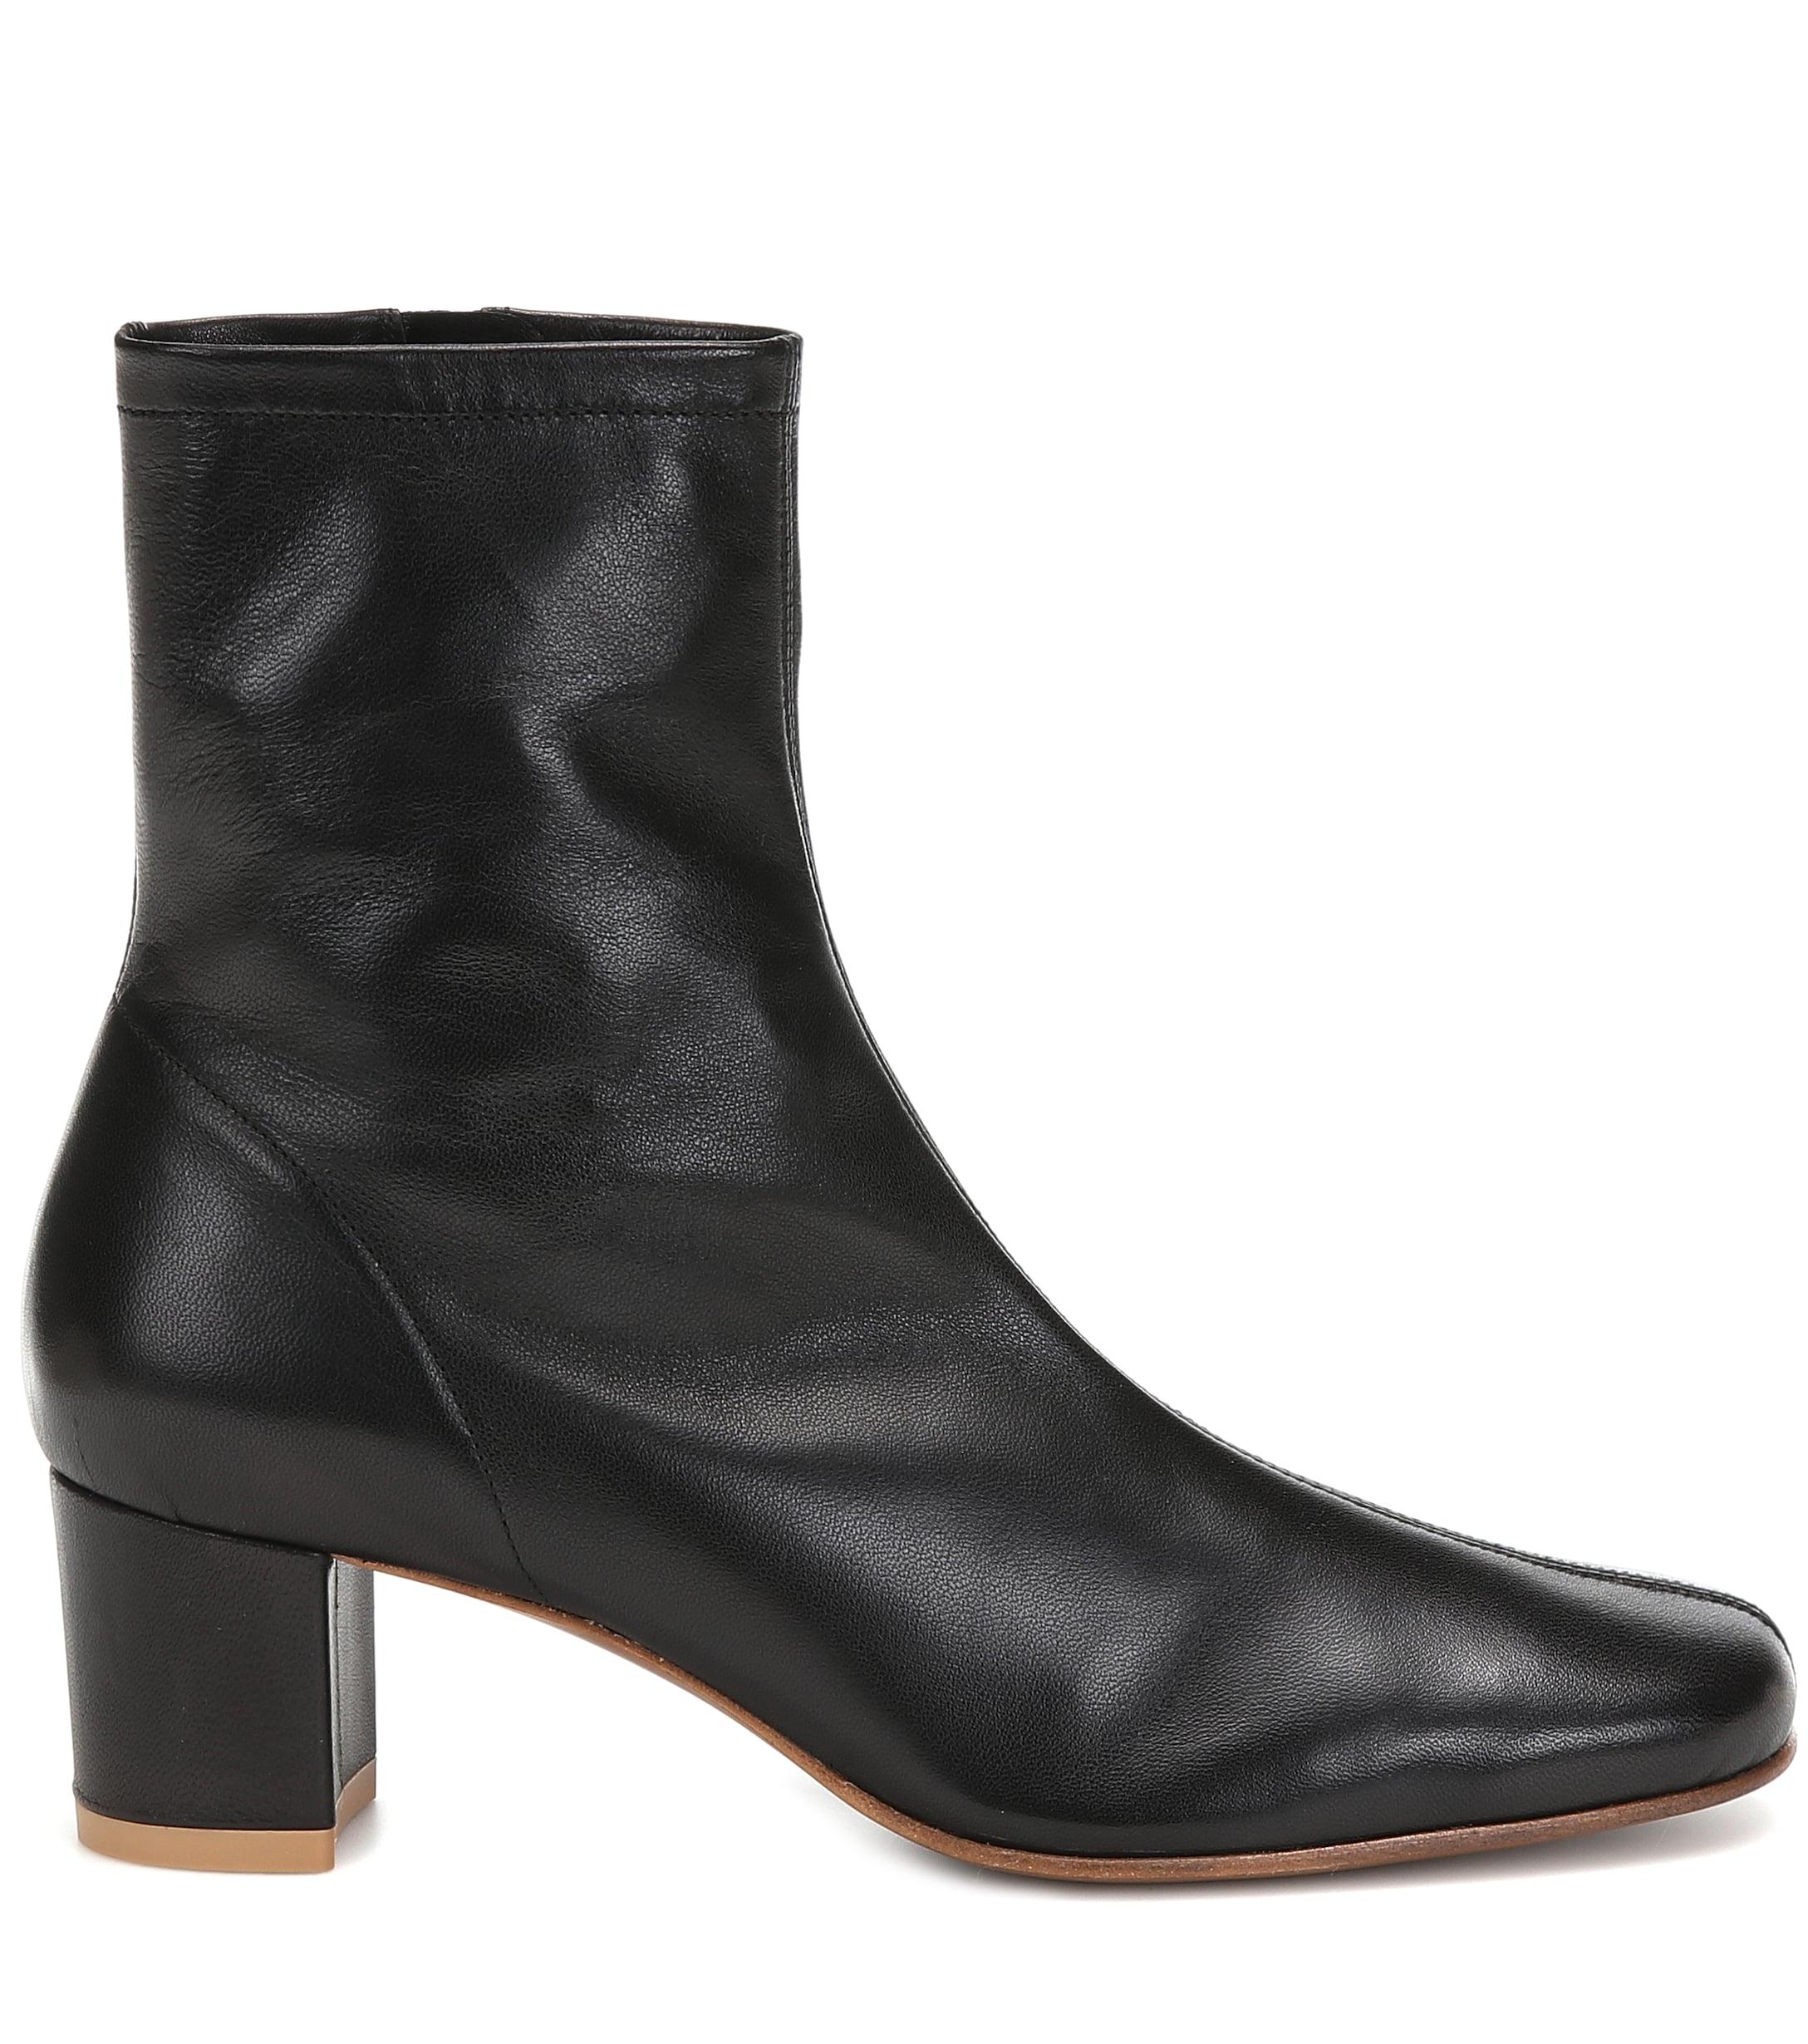 BY FAR Sofia Leather Ankle Boots in Black - Save 36% - Lyst